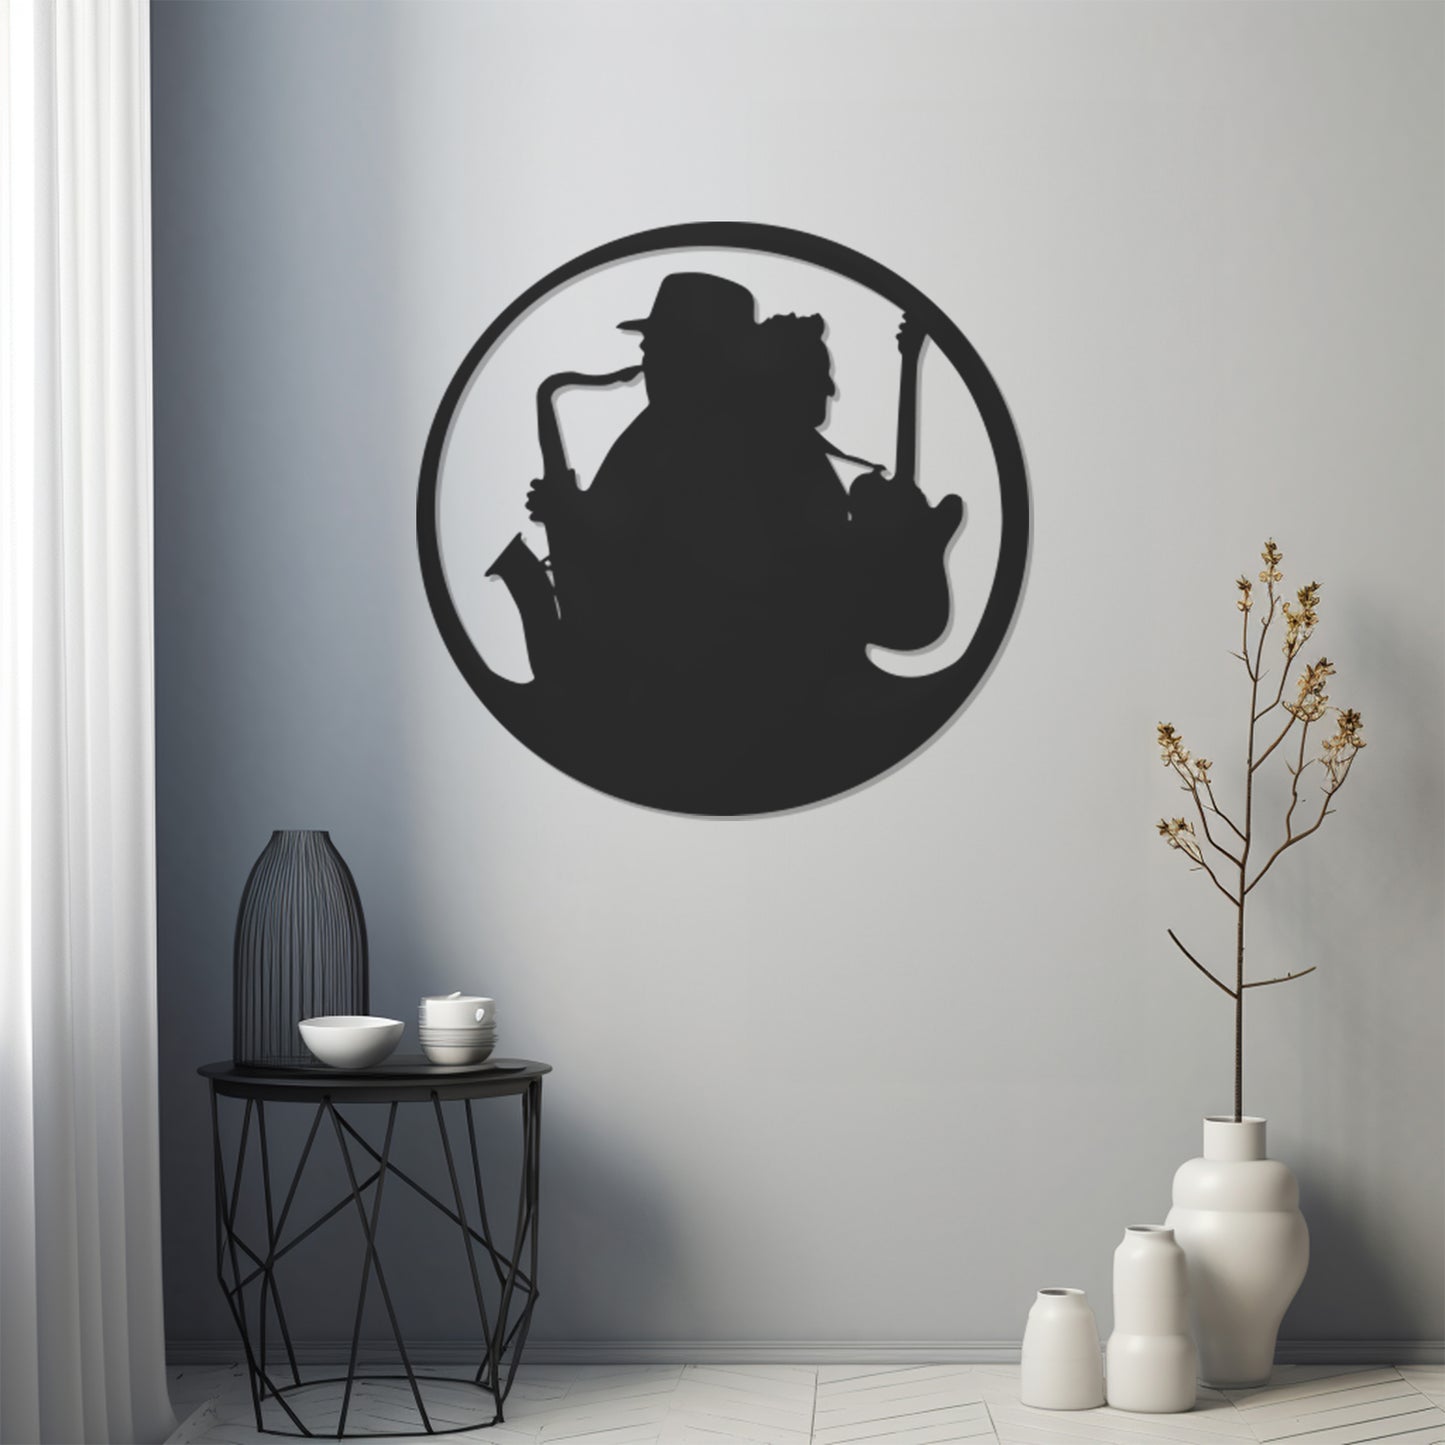 Silhouette Of Man Playing Instrument Metal Wall Art Decor